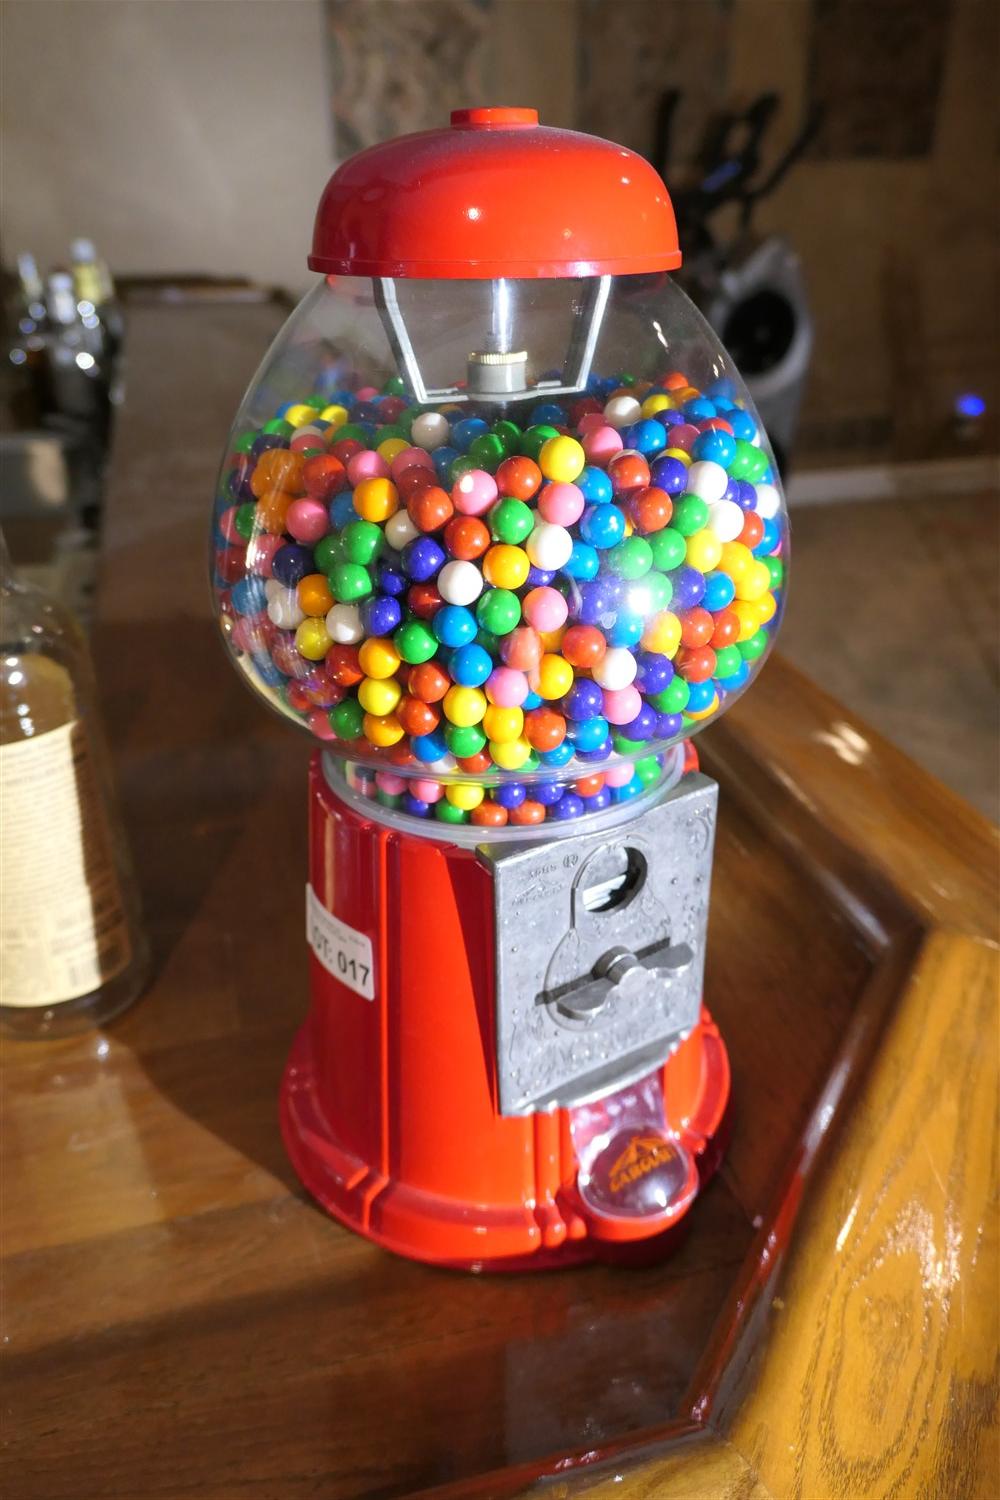 Metal and glass vintage style gumball machine